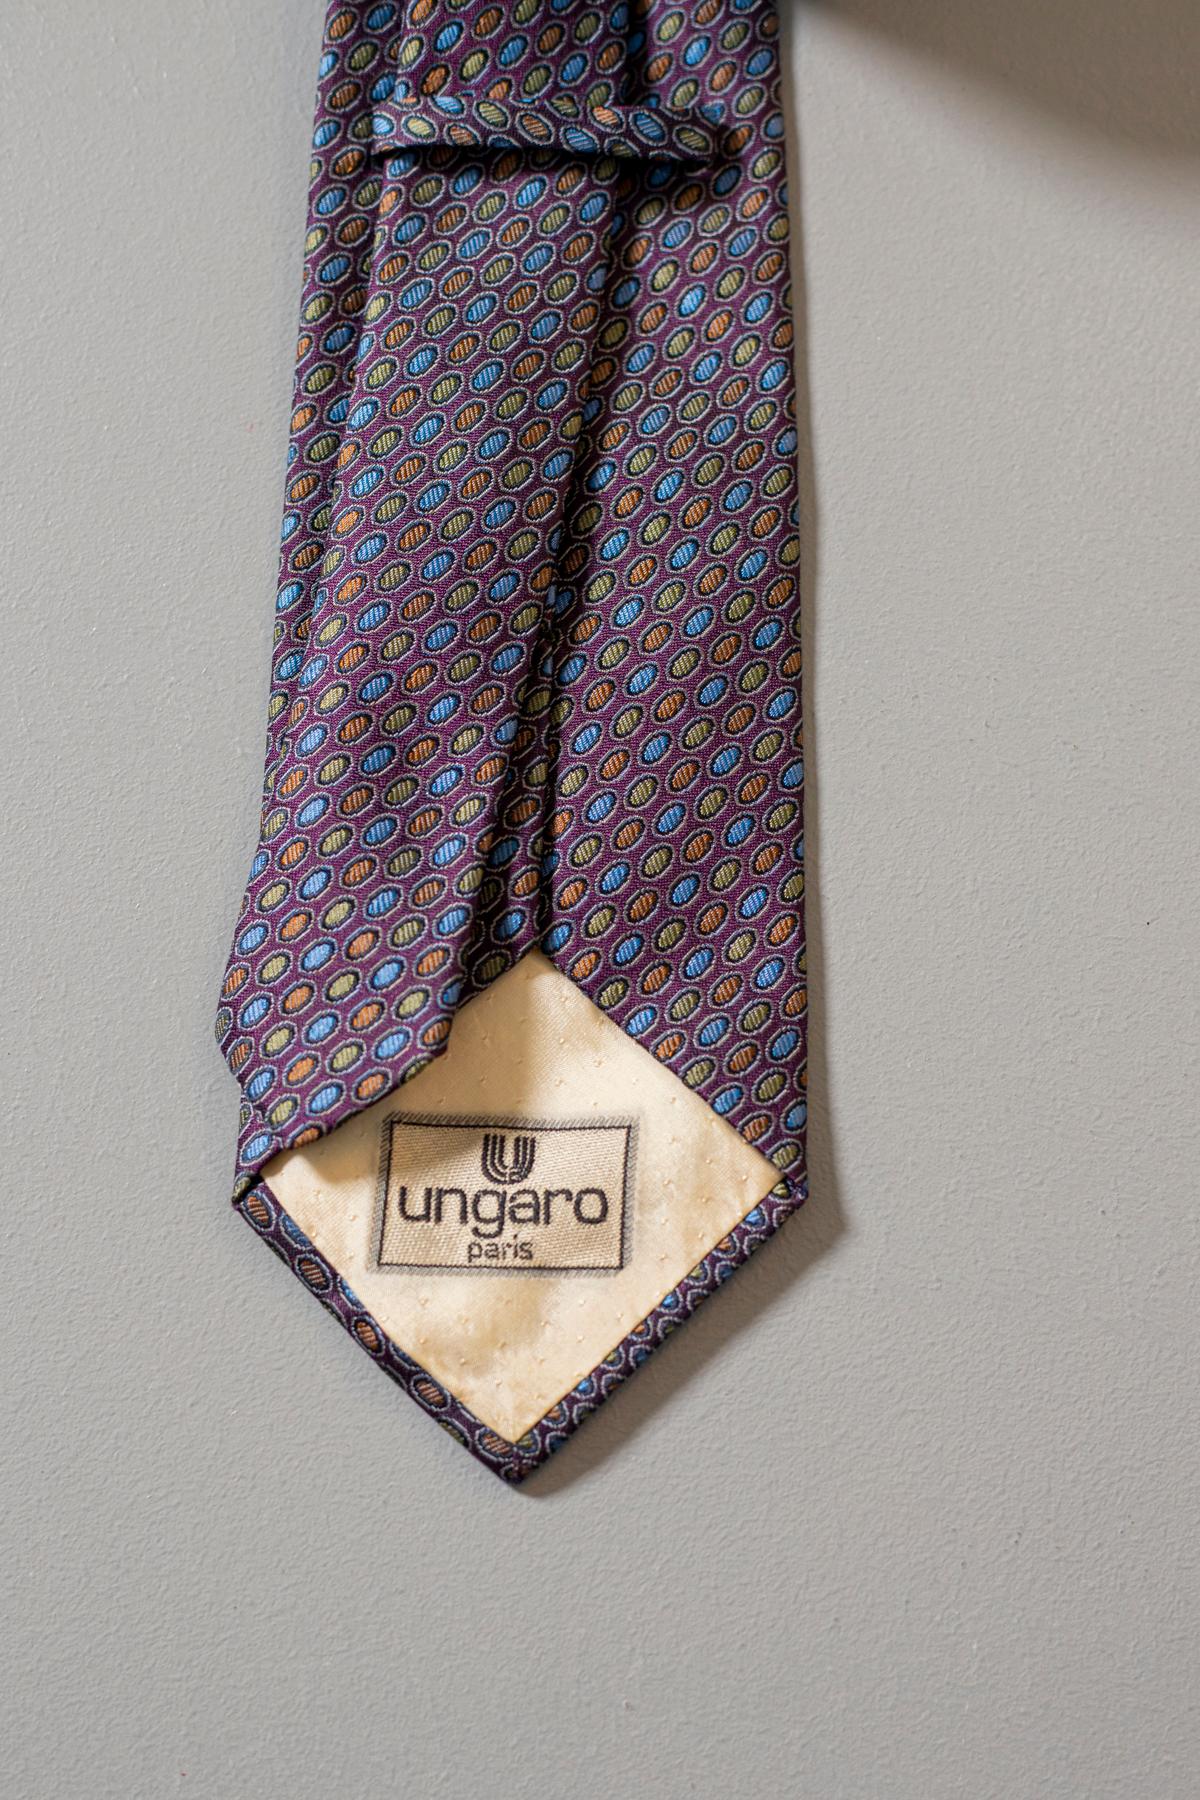 Elegant and classic, this tie designed by Ungaro is made of silk. Decorated with small colored dots on a dark purple background. With a classic, refined design, it is the perfect accessory for a job interview to make your style unique. 